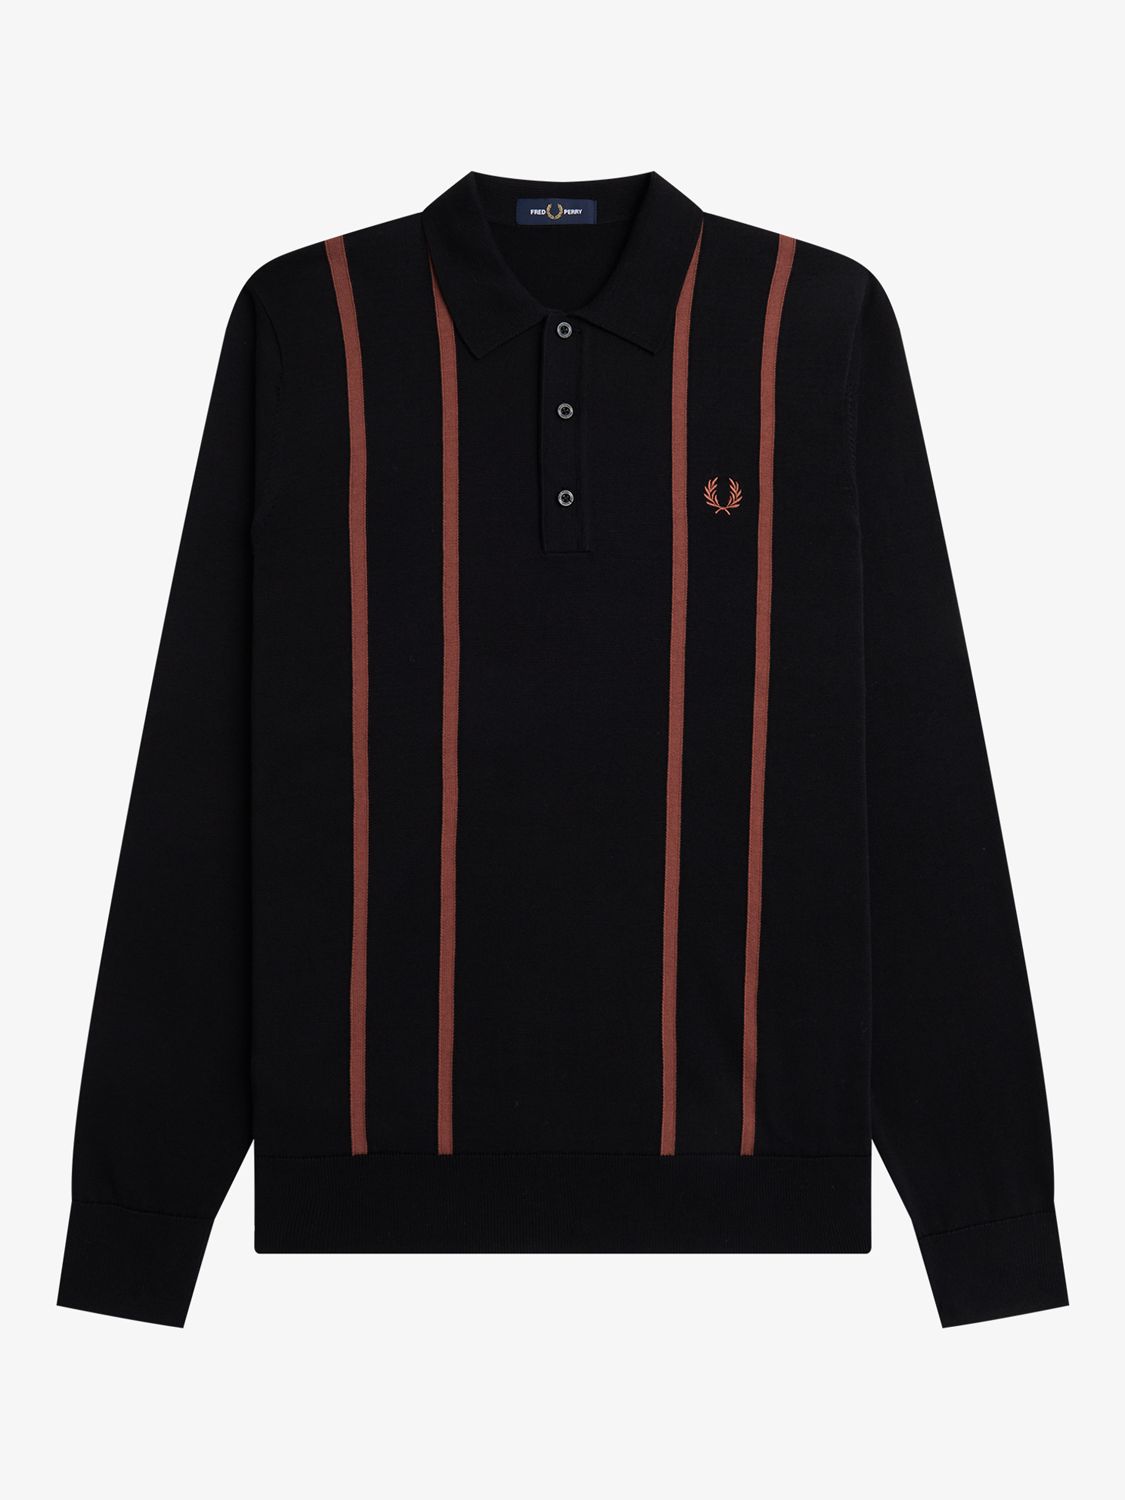 Fred Perry Textured Knit Long Sleeve Polo Shirt, Black/Red, XL